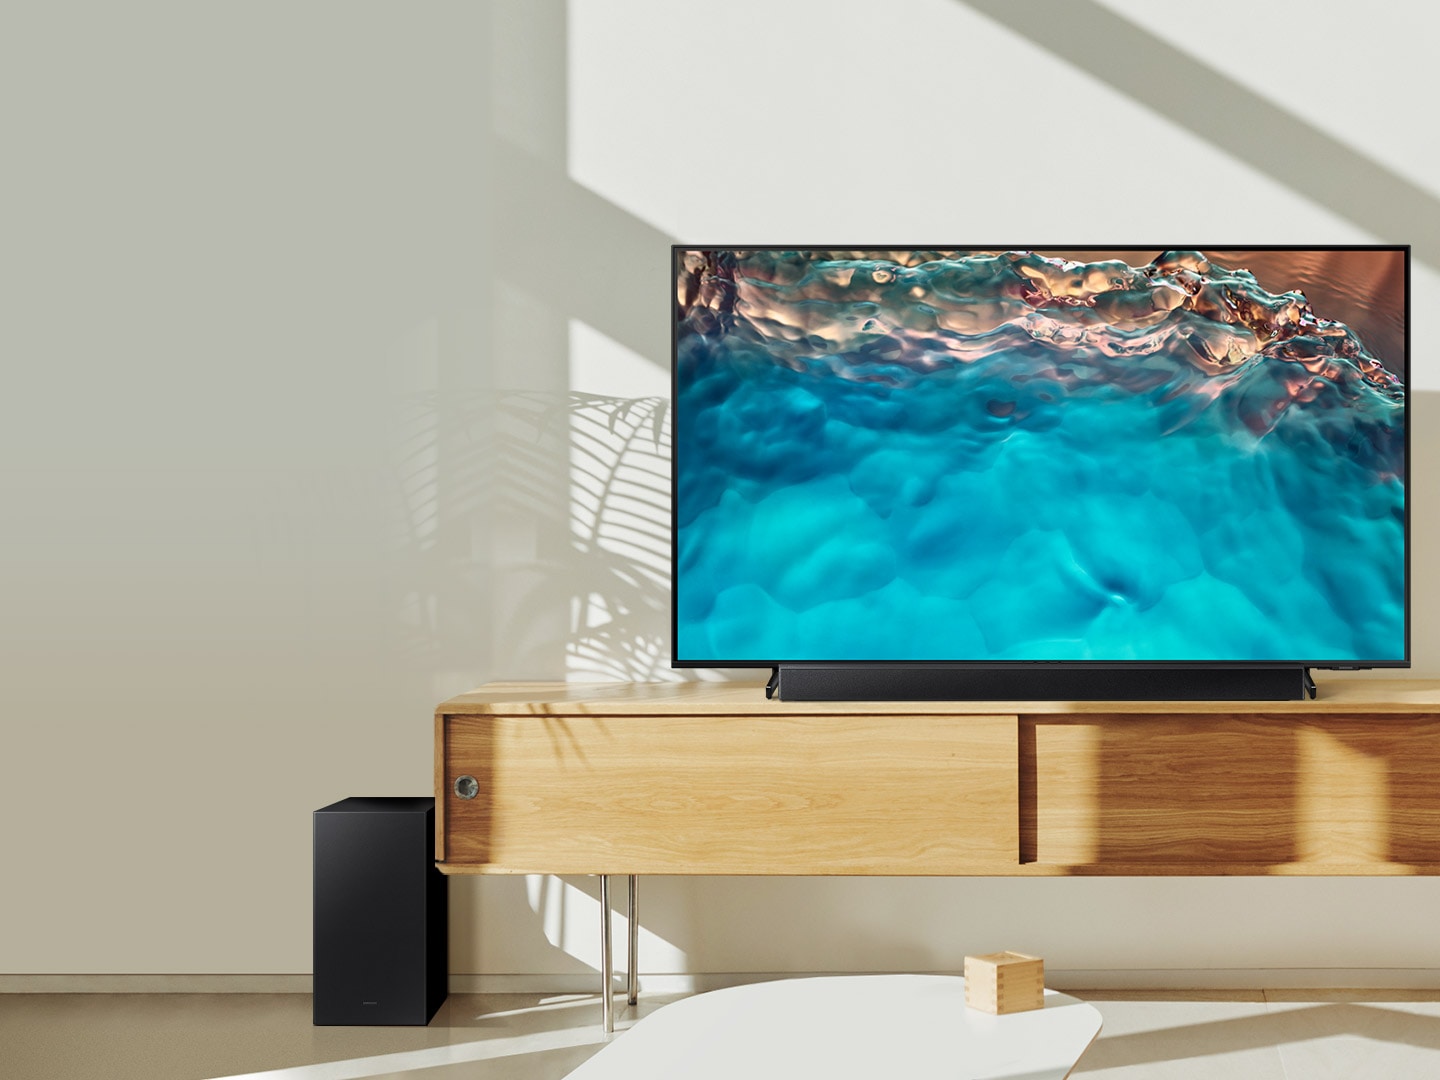 How To Connect Samsung TV To Samsung Sound Bar